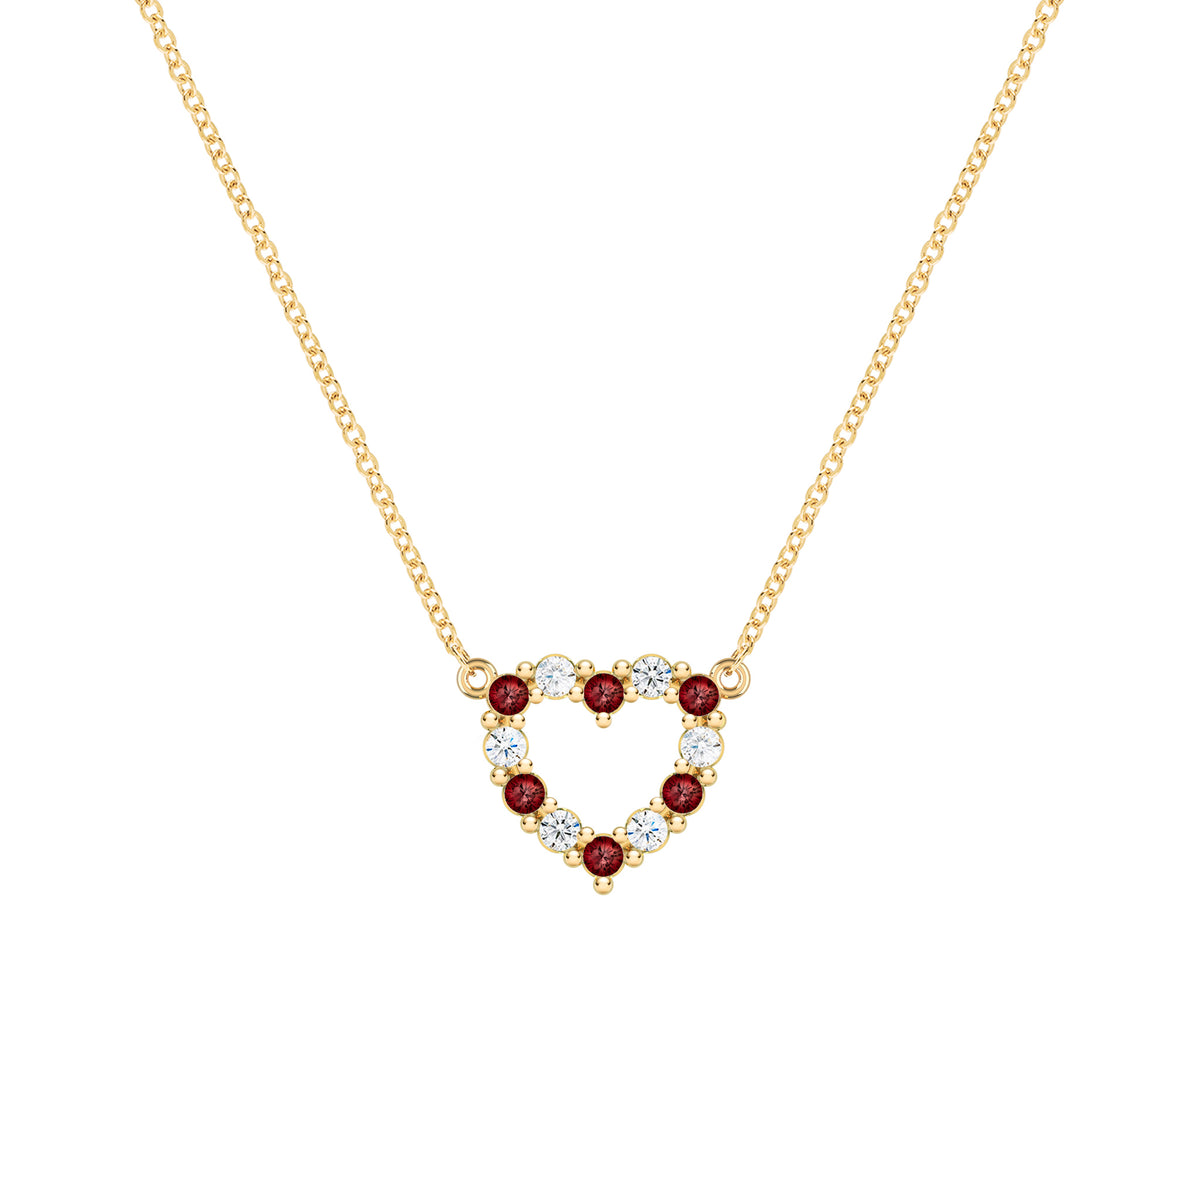 Rosecliff Small Heart Diamond & Ruby Necklace in 14K Yellow Gold (July), X-Small (15”)